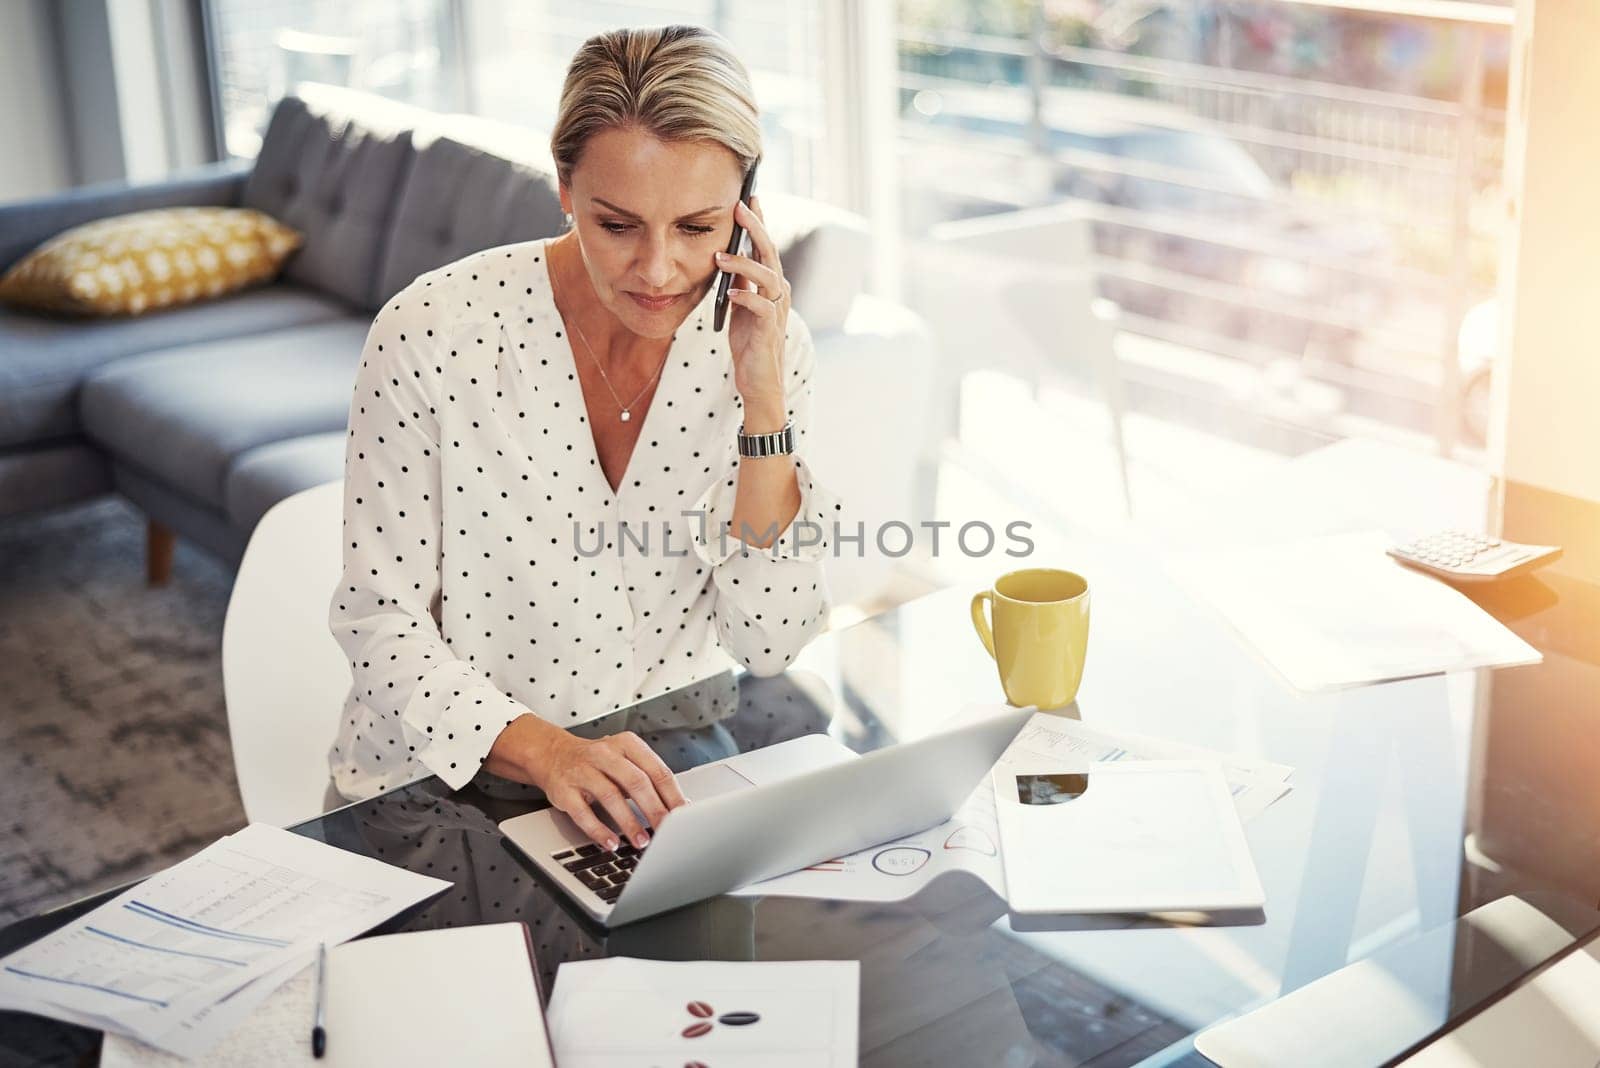 She stays on top of her stats. a mature businesswoman working from her home office